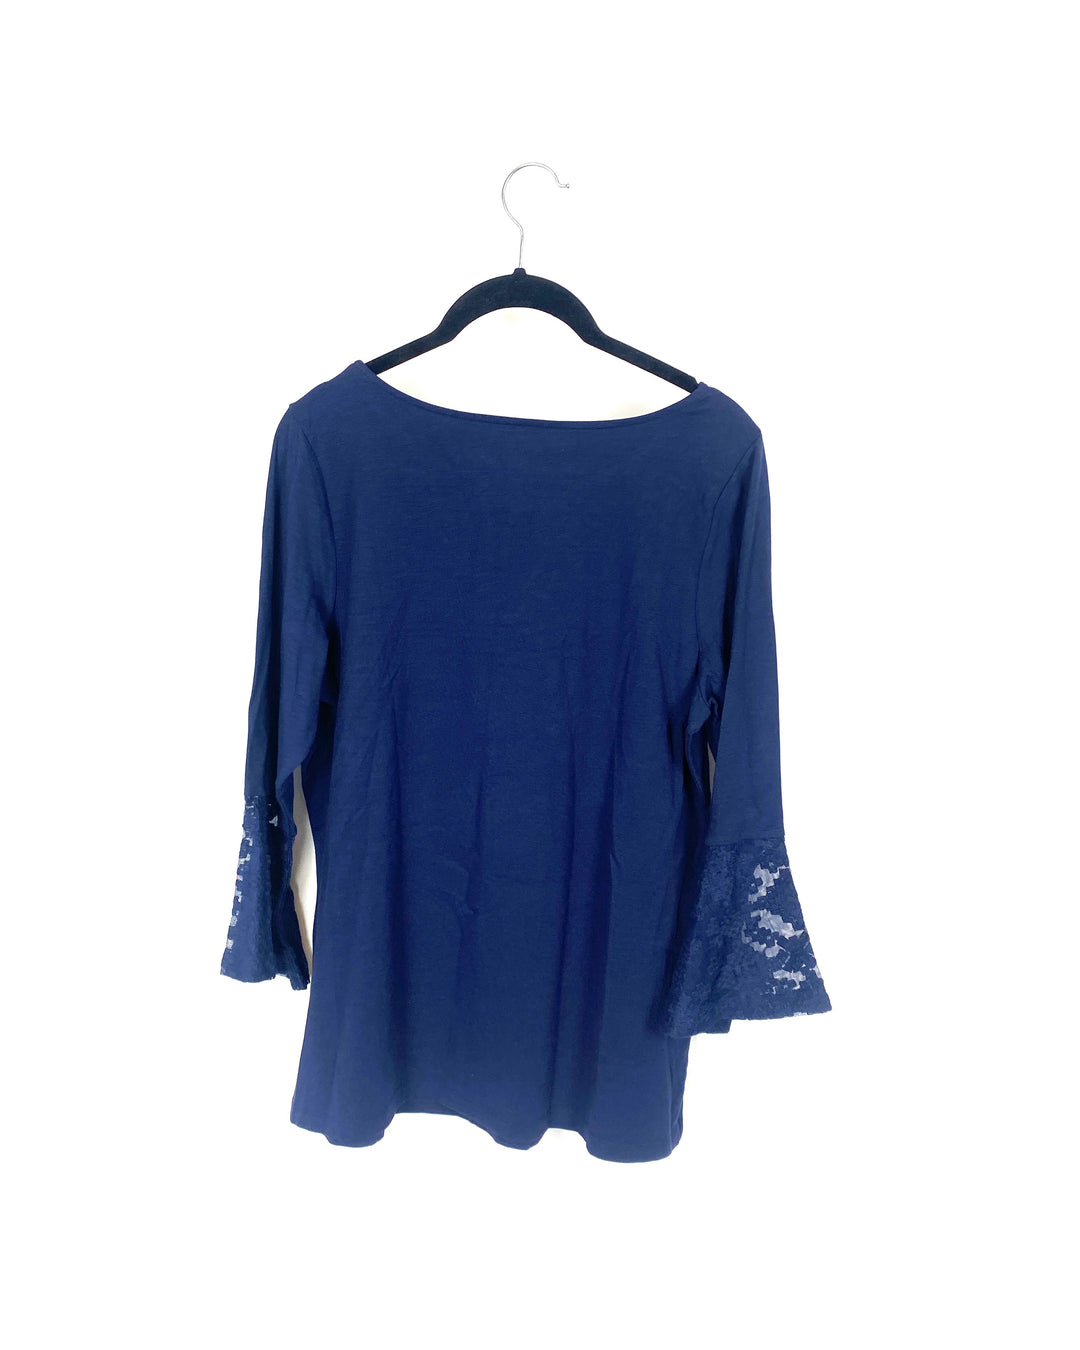 Navy Blue Top With Lace - Small/Medium